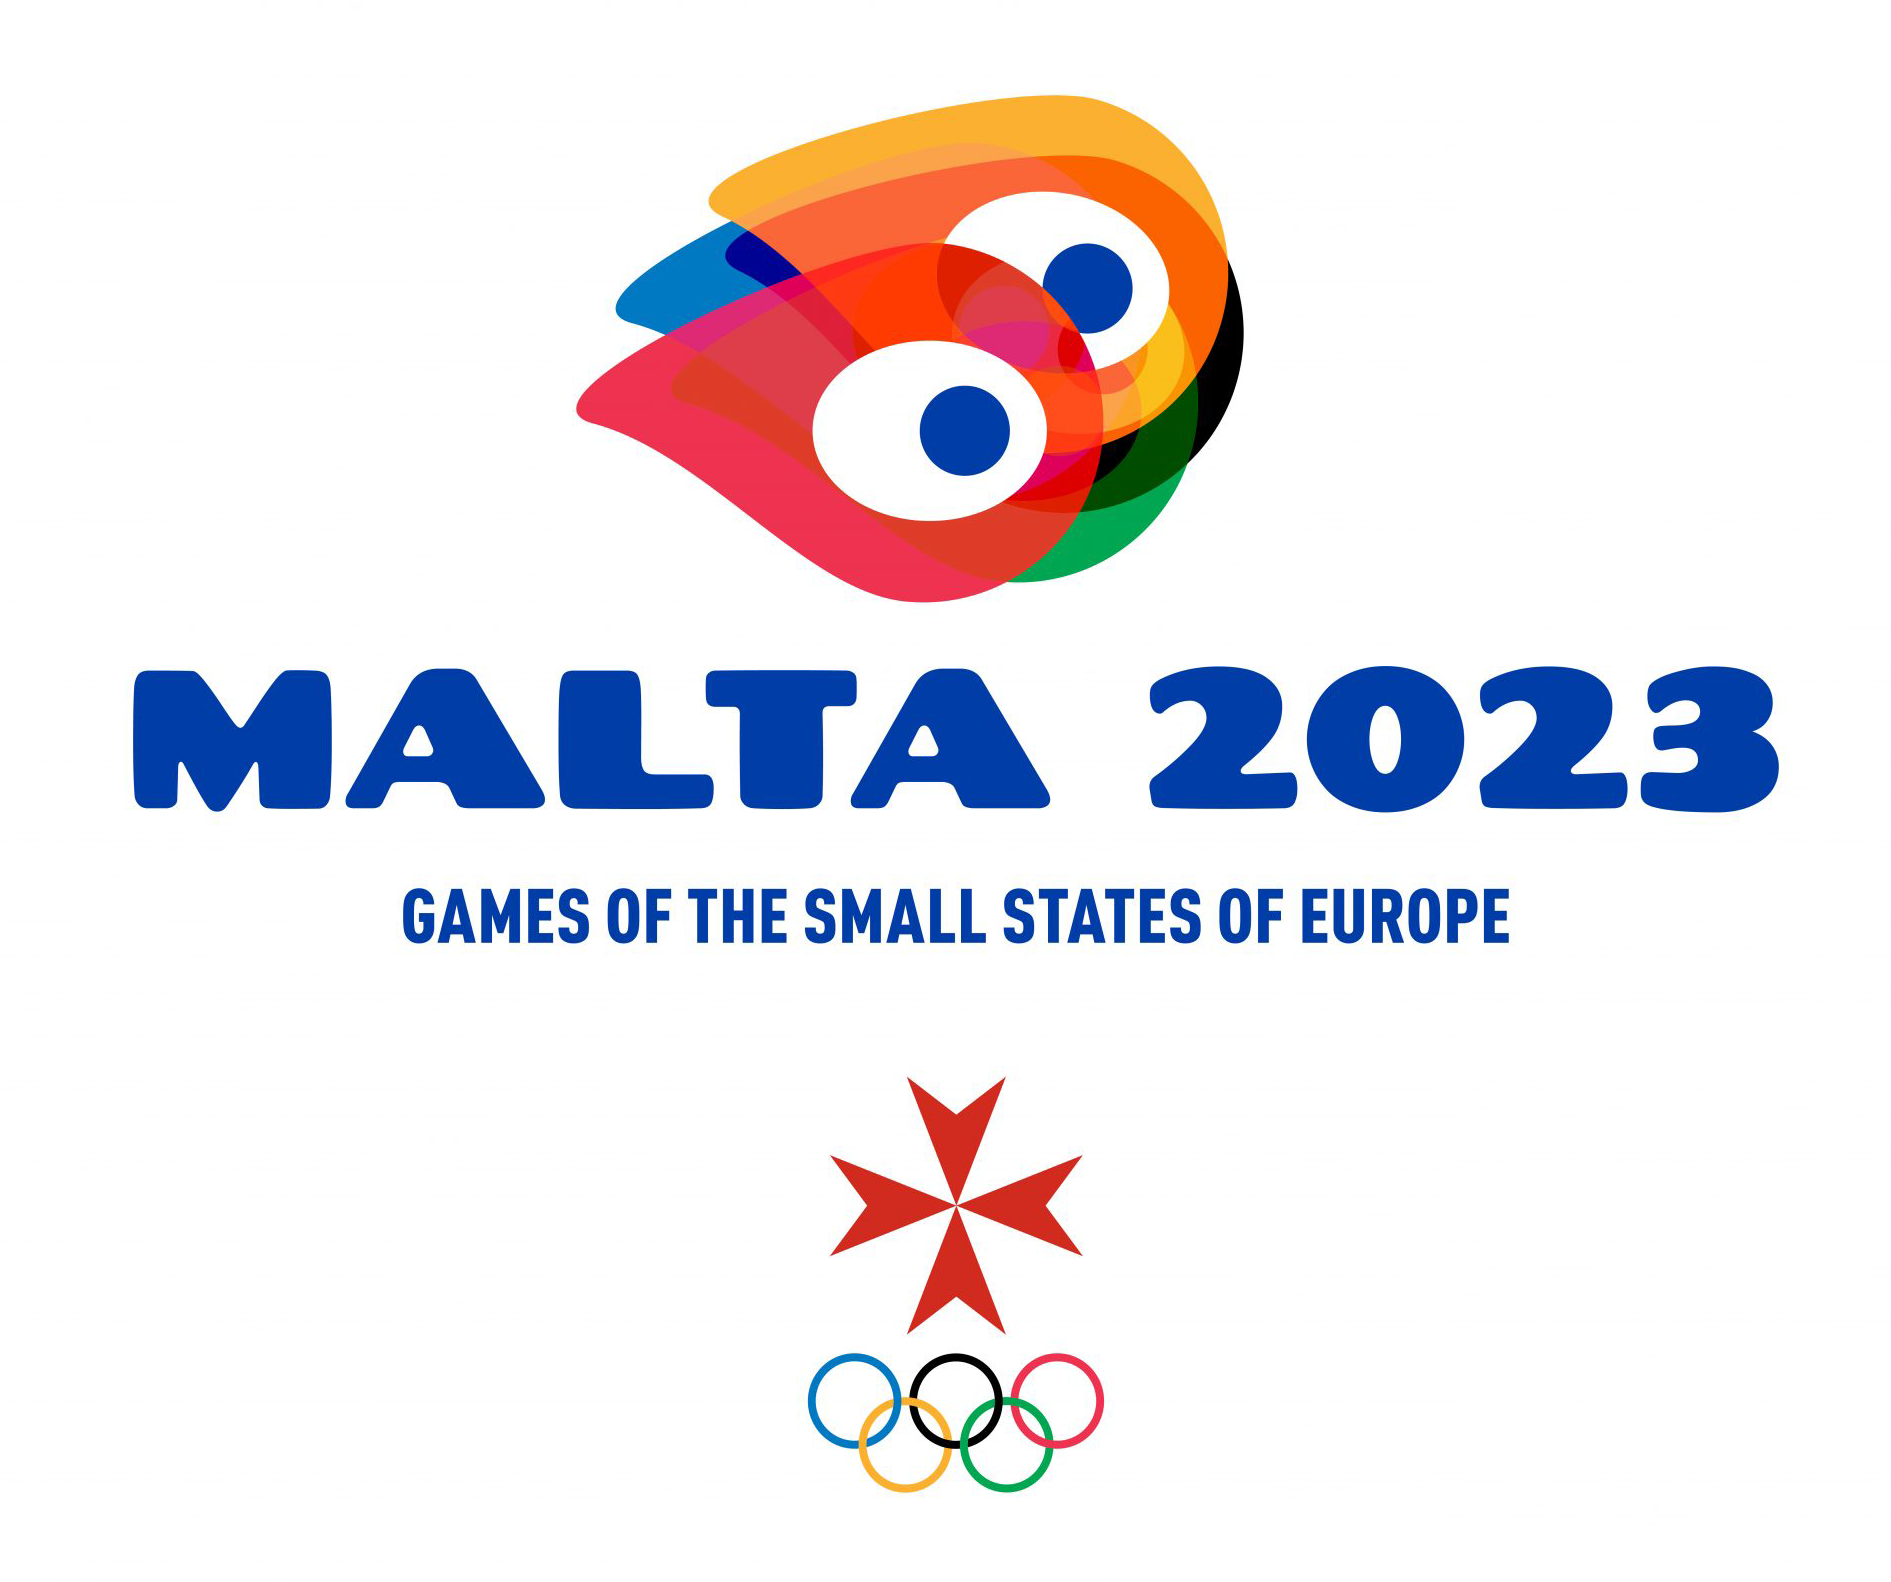 Supporting Sport Integrity at the Games of the Small States of Europe